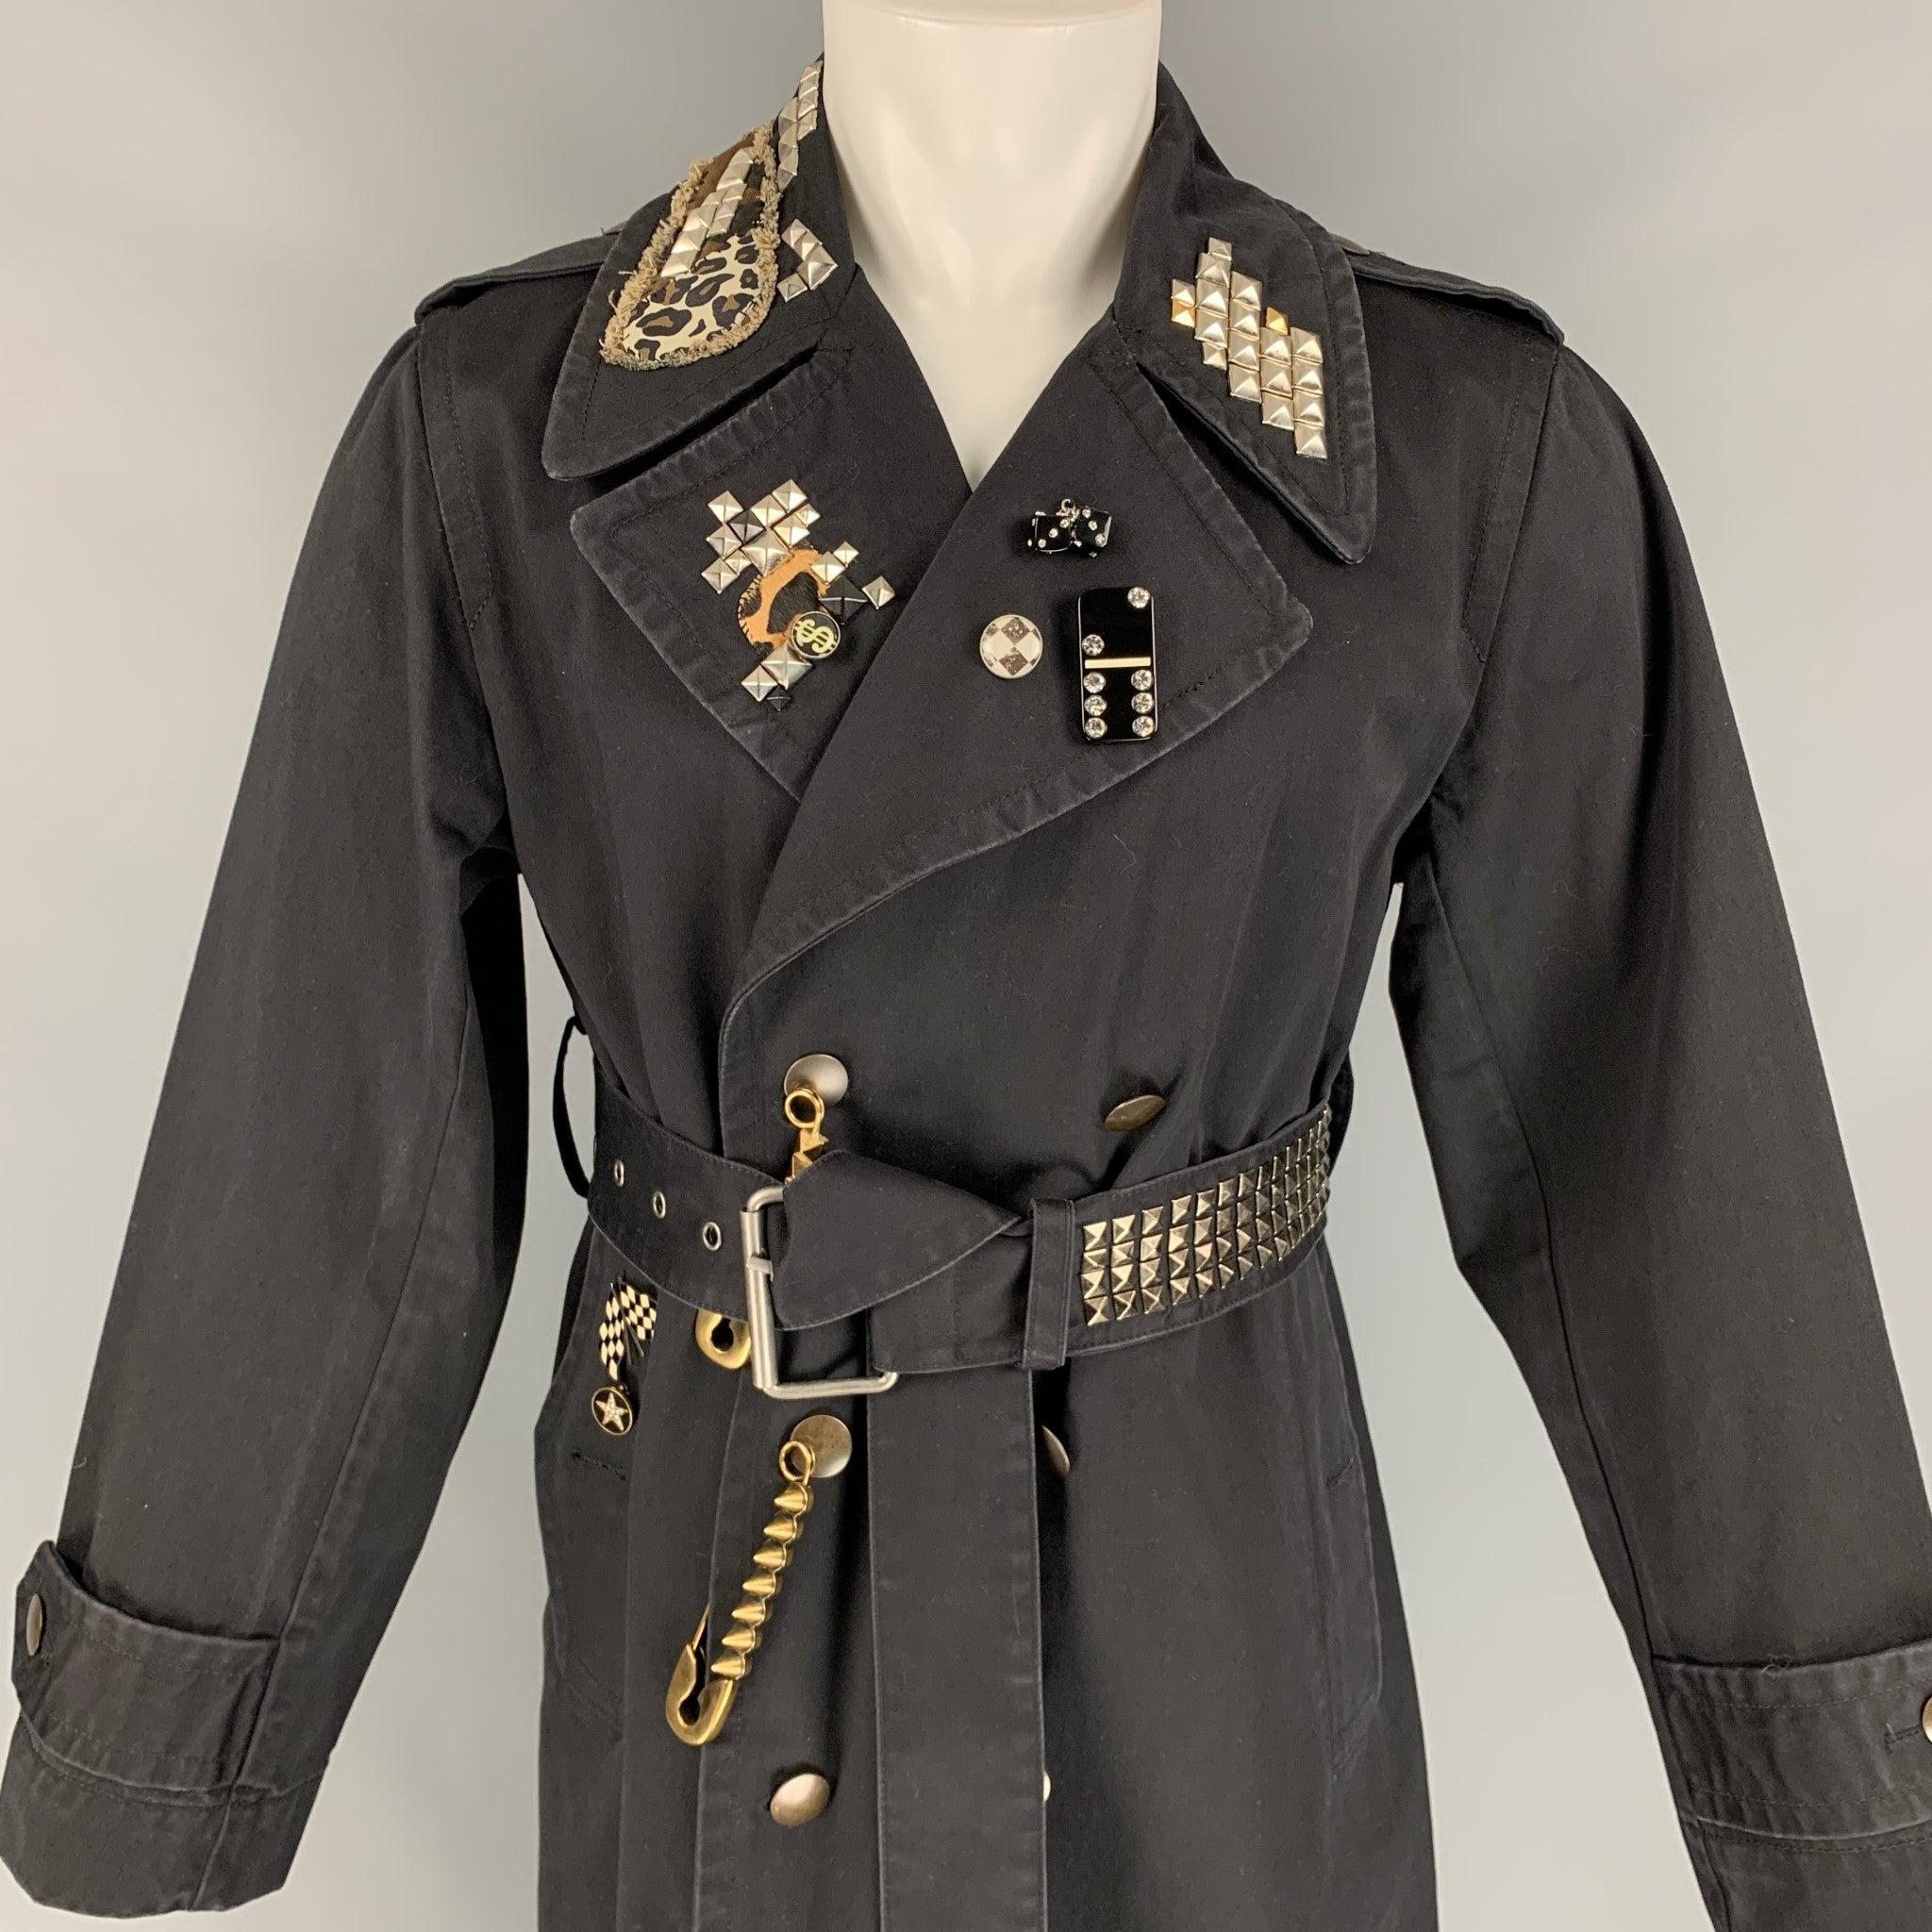 MARC JACOBS trenchcoat comes in a black cotton featuring a belted style, studded details, metal pins, embroidered patch, single back vent, slit pockets, and a double breasted closure.
New With Tags.
 

Marked:  M/M 

Measurements: 
 
Shoulder:
17